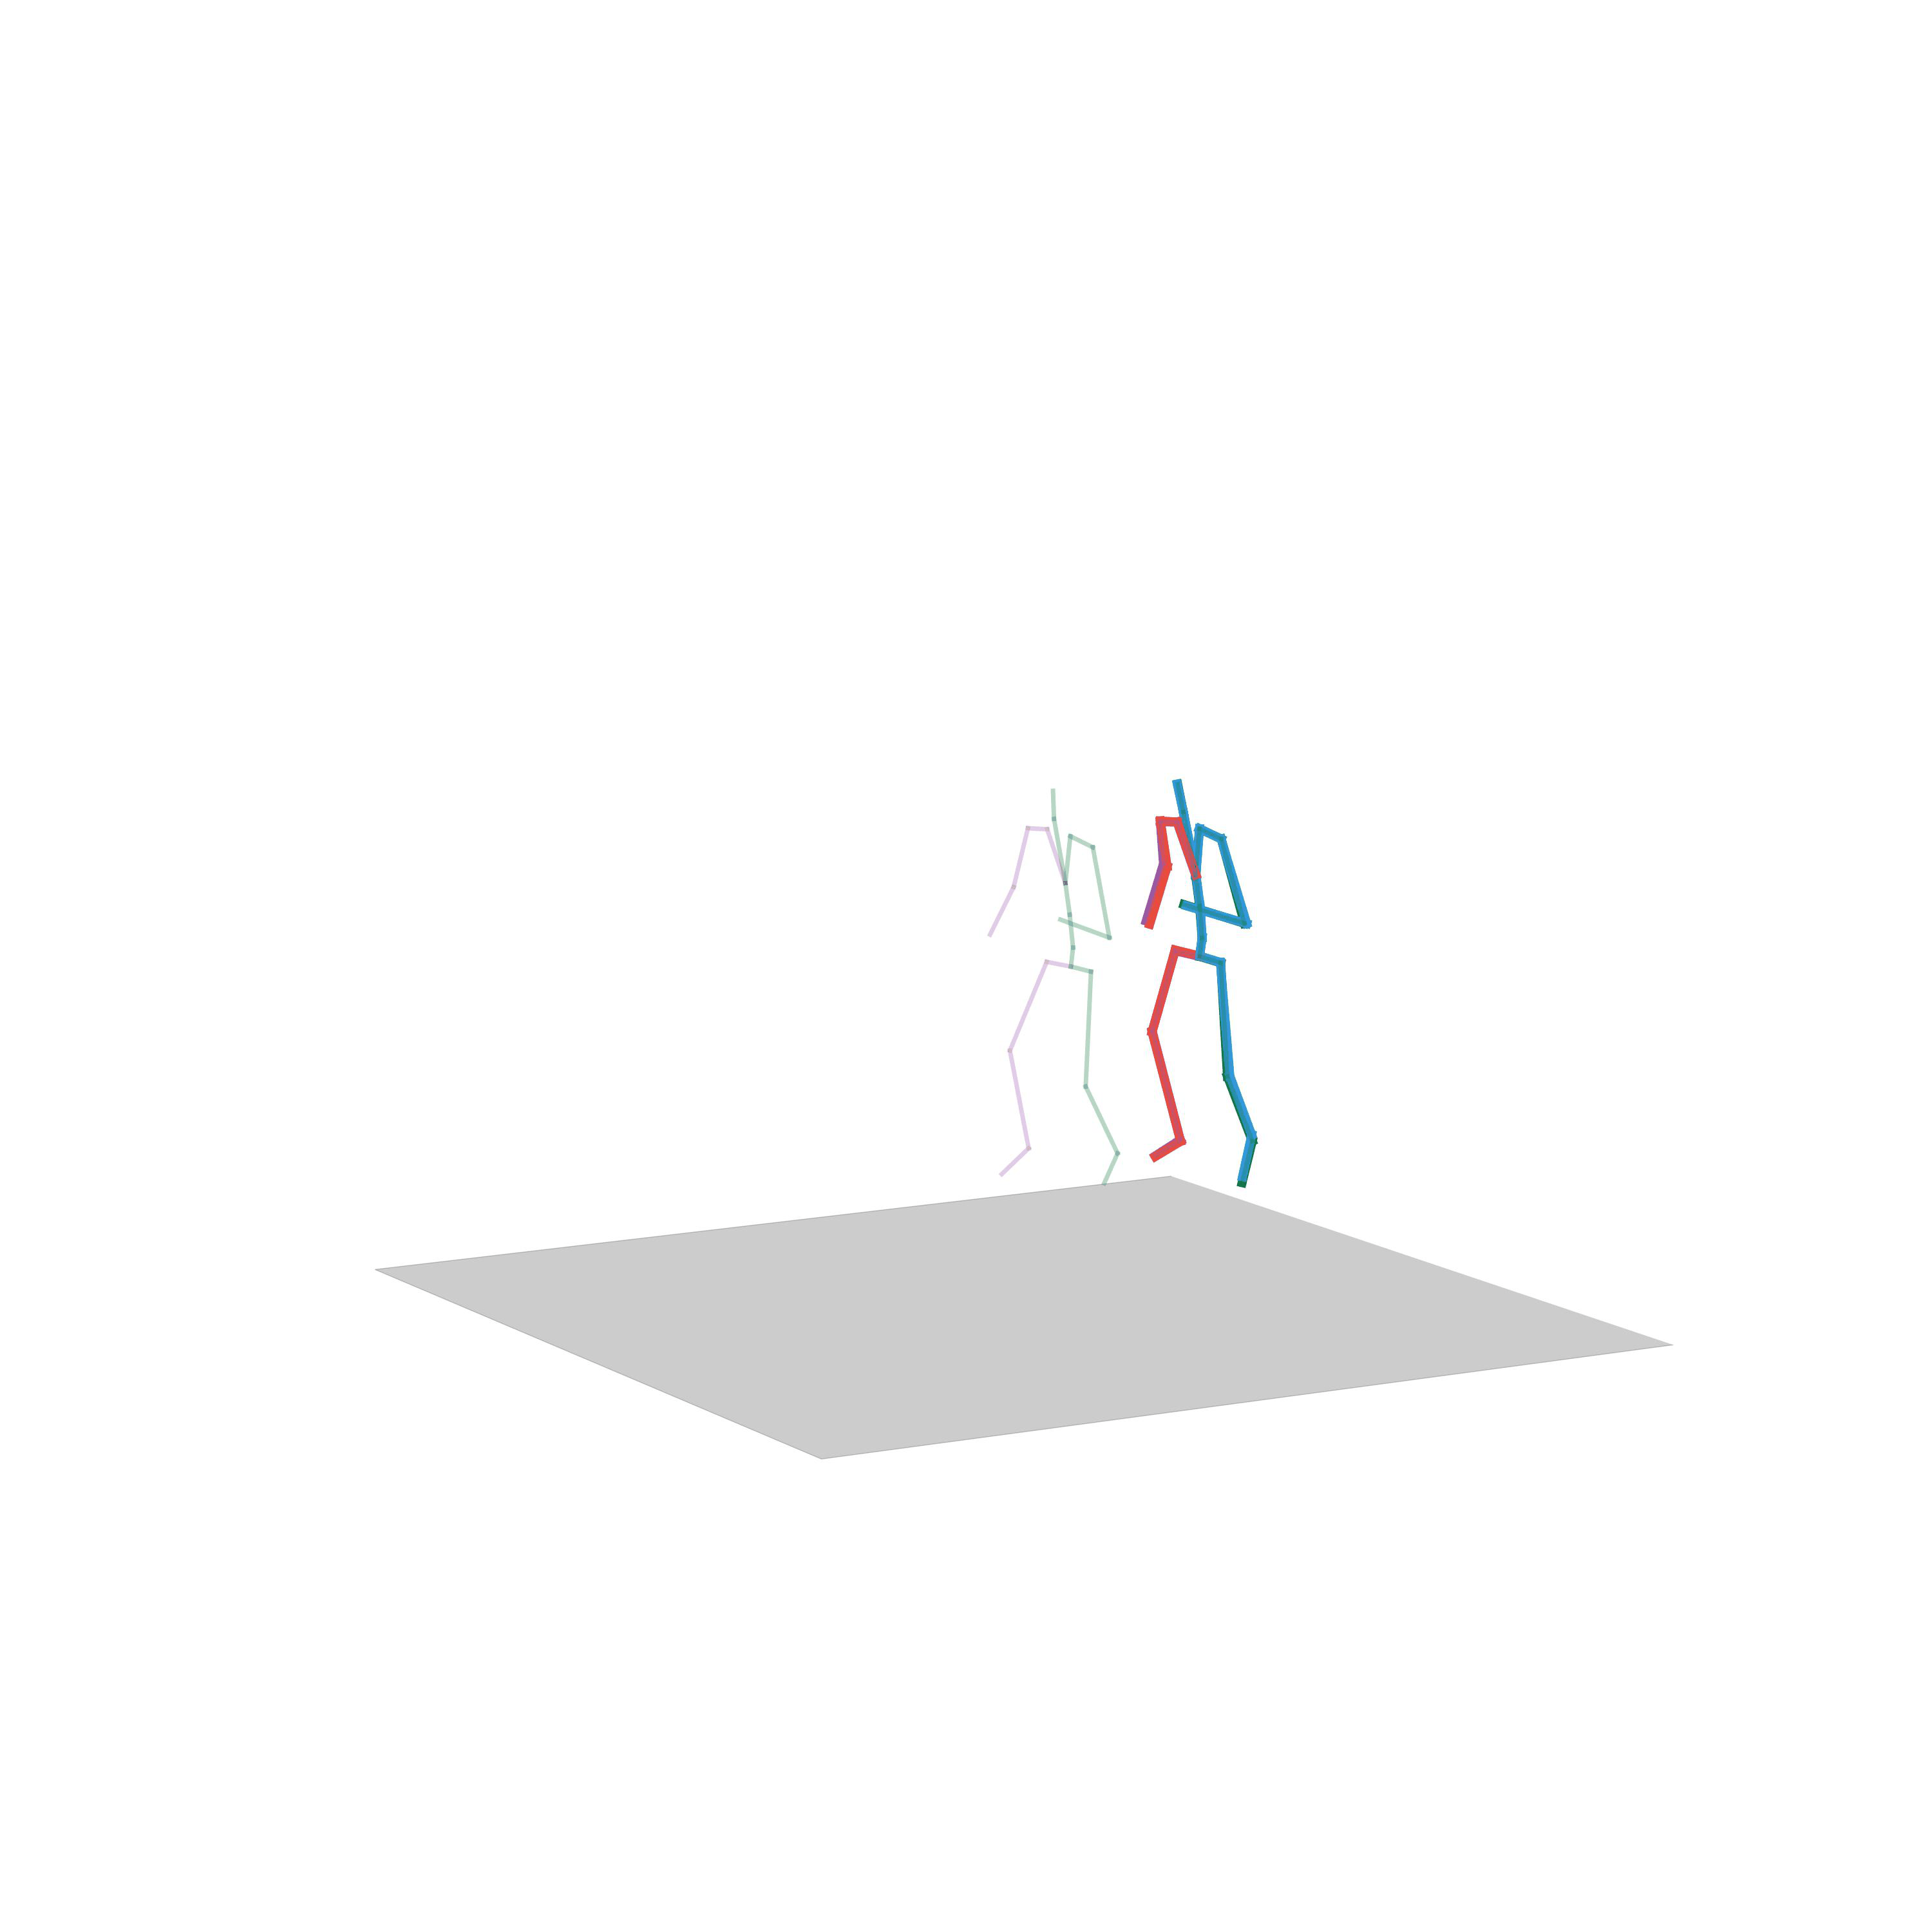 Walkavoiding Obstacles.Gif